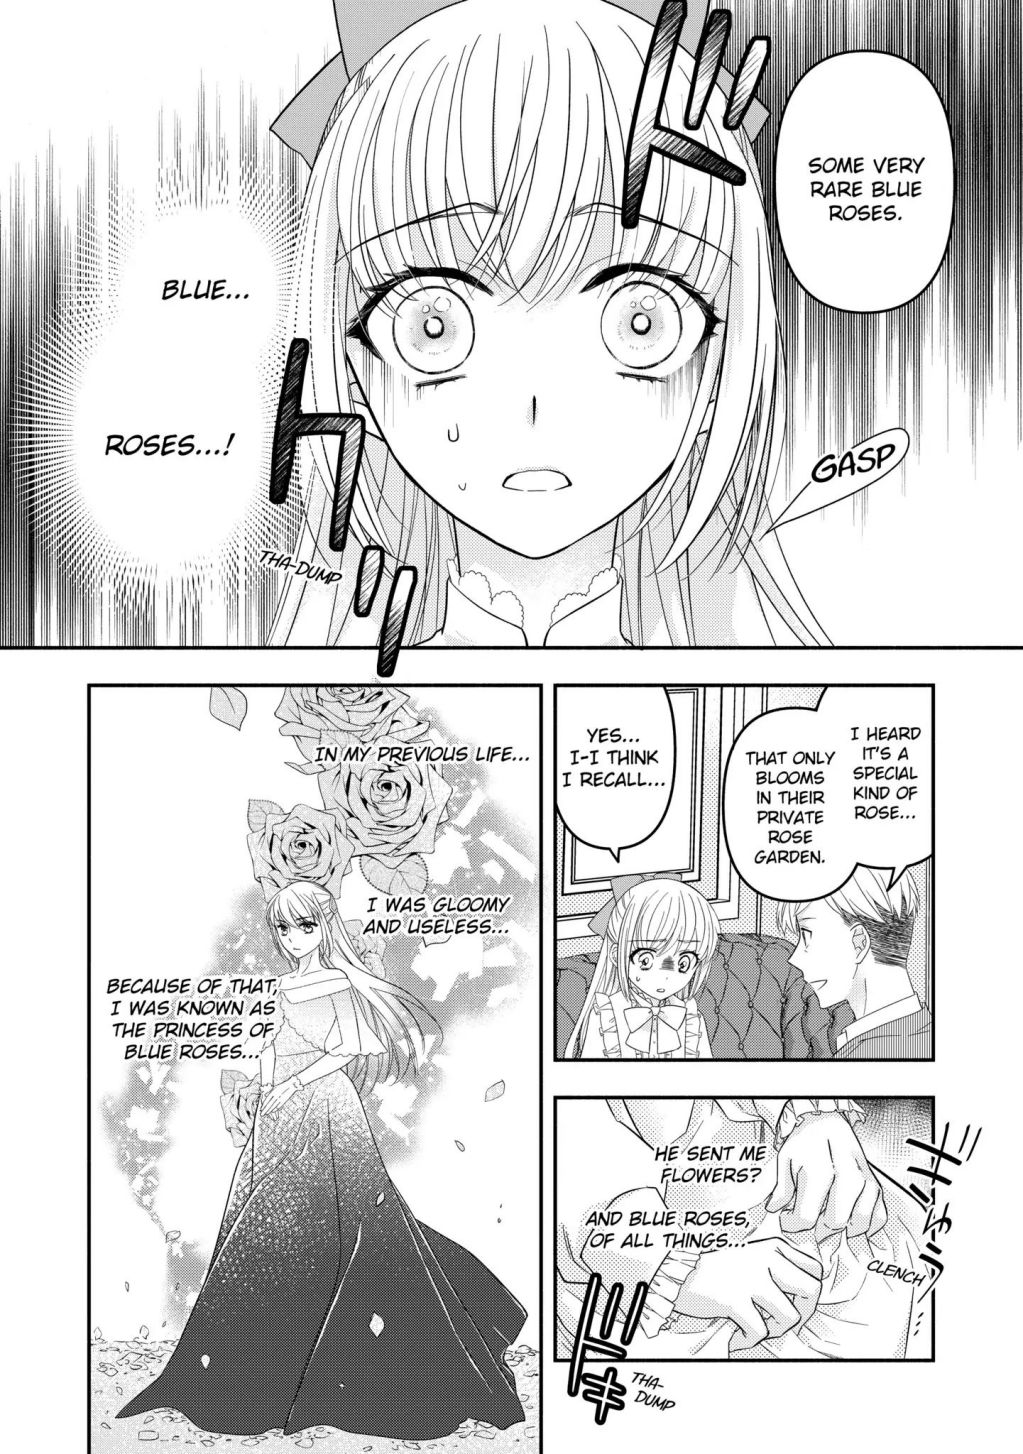 The Princess Of Blue Roses - chapter 4.2 - #6